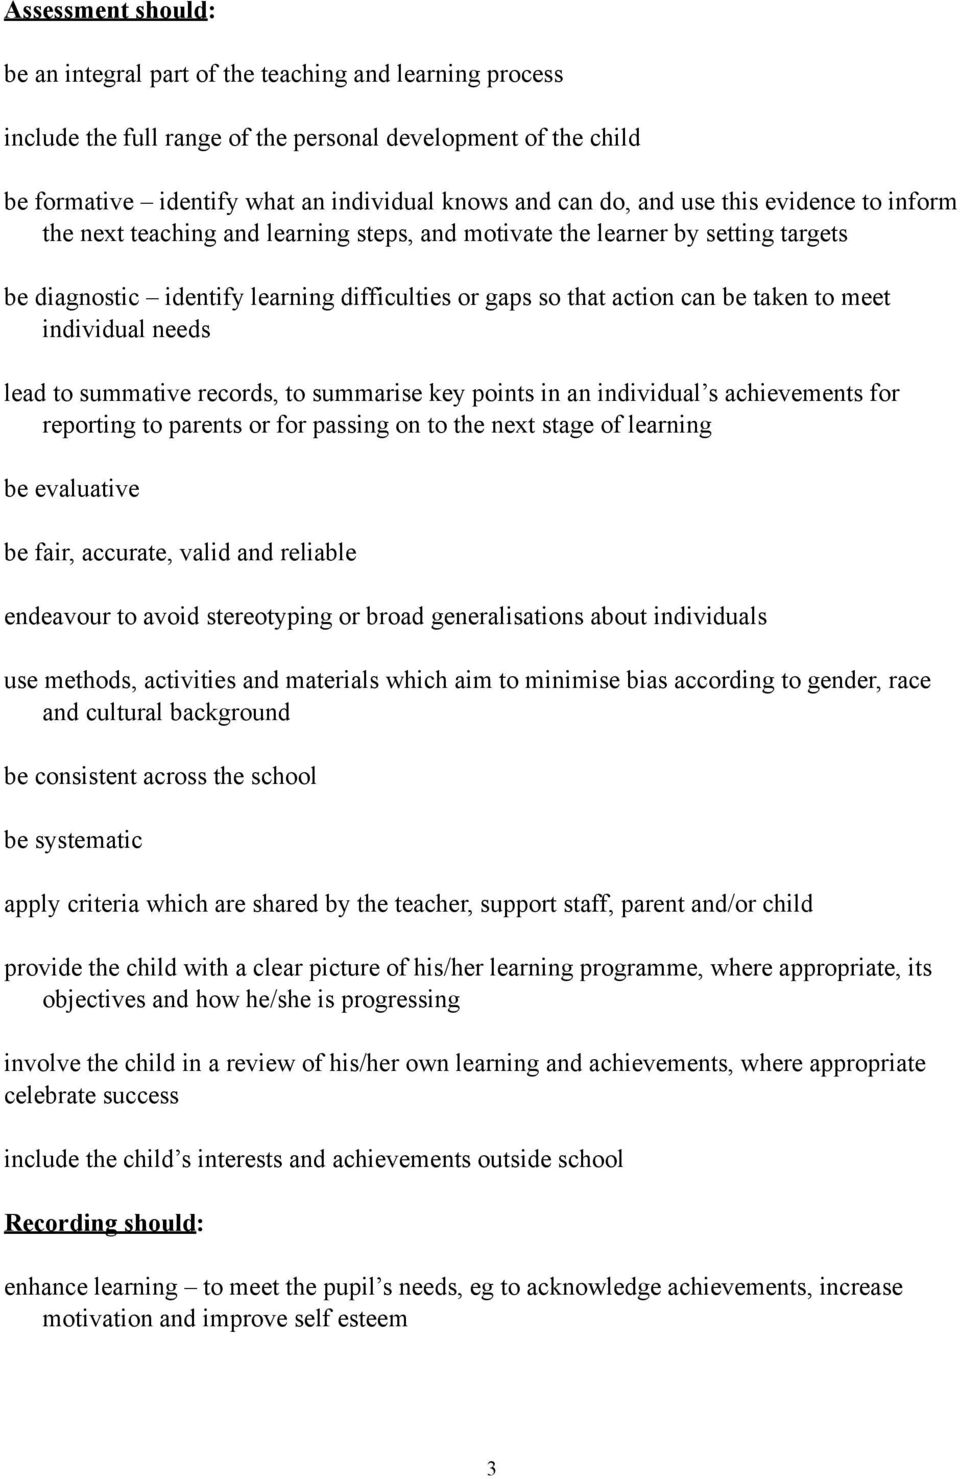 meet individual needs lead to summative records, to summarise key points in an individual s achievements for reporting to parents or for passing on to the next stage of learning be evaluative be